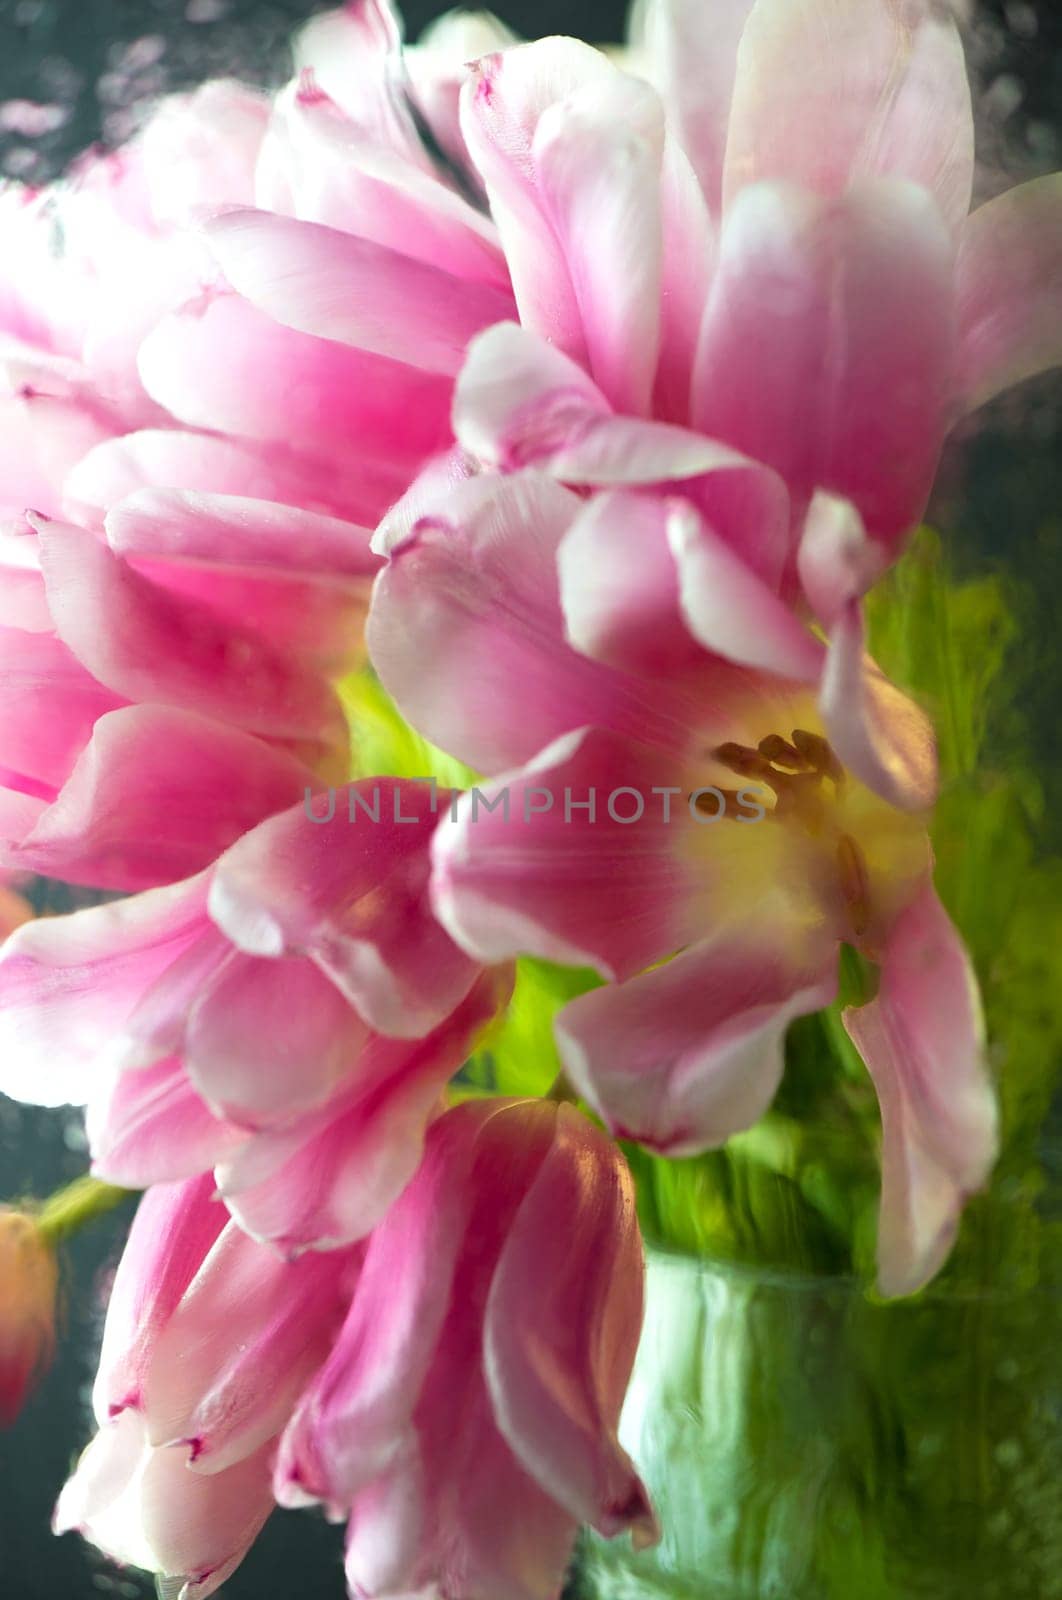 behind the glass window in the house pink tulips Rain outside by aprilphoto